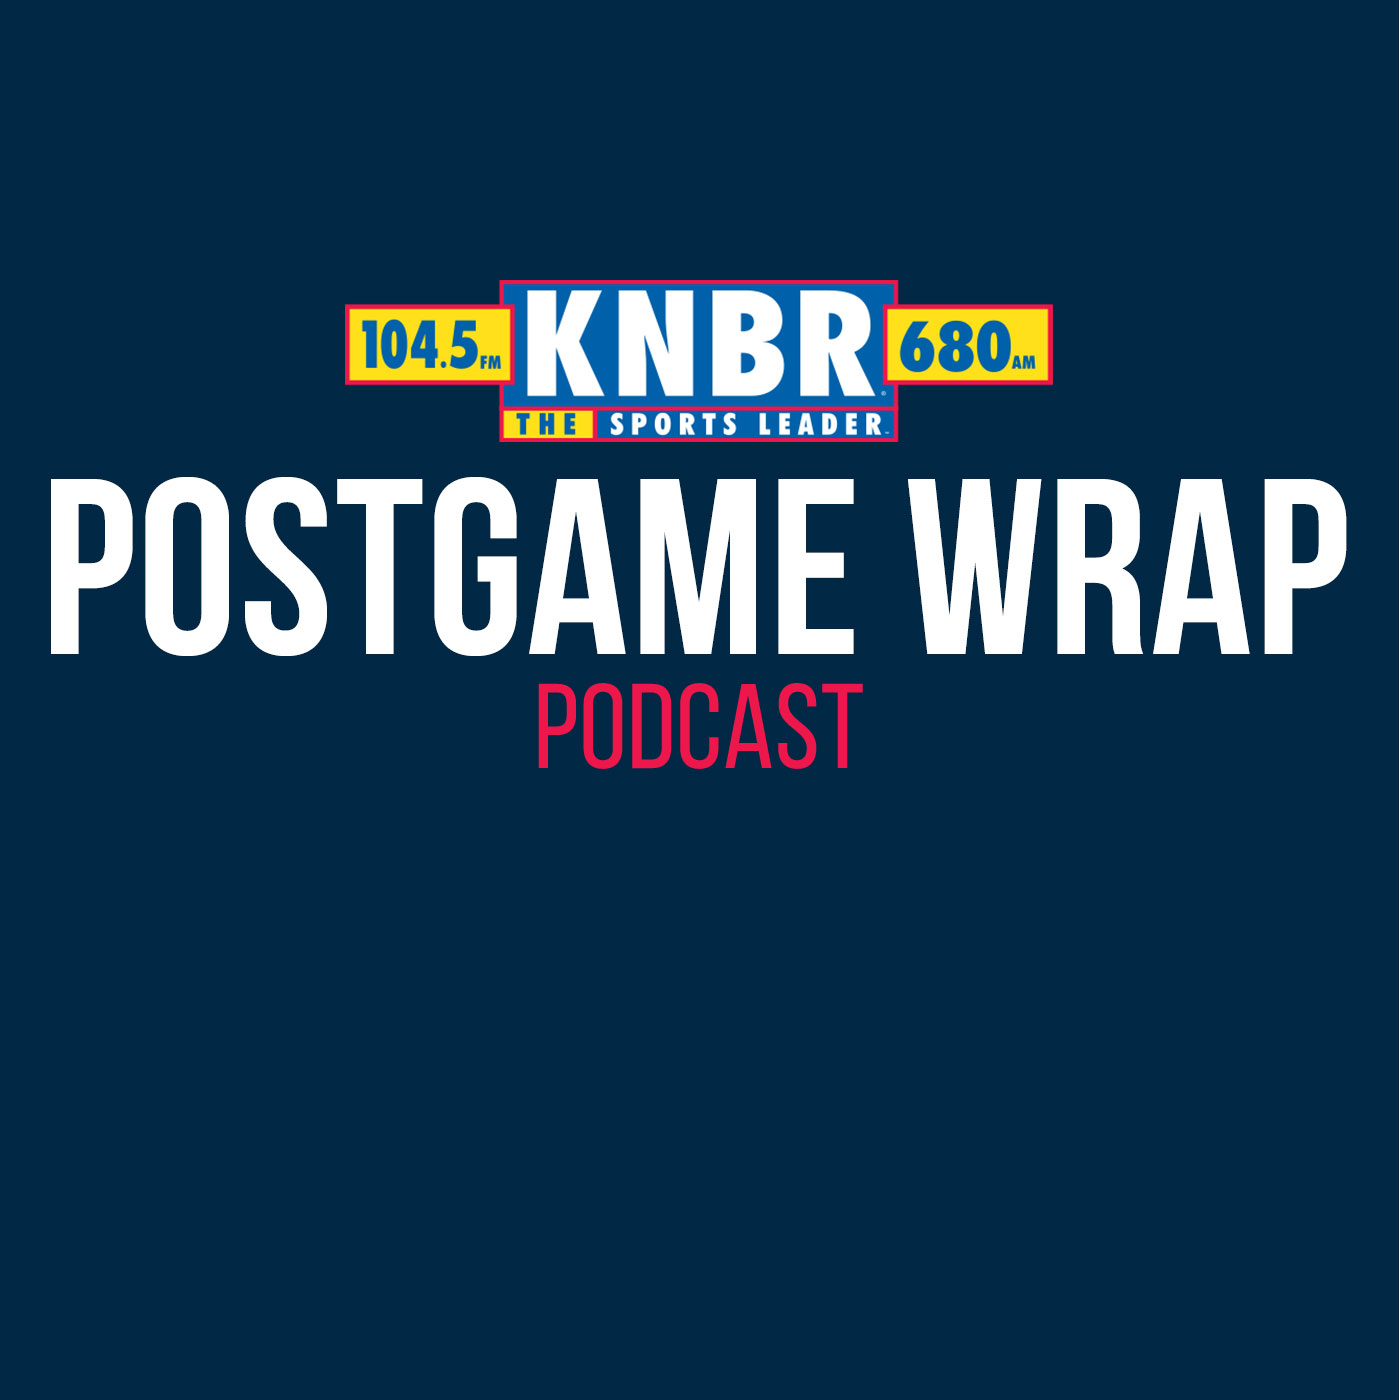 6-19 Postgame Wrap: Cubs 6, Giants 5